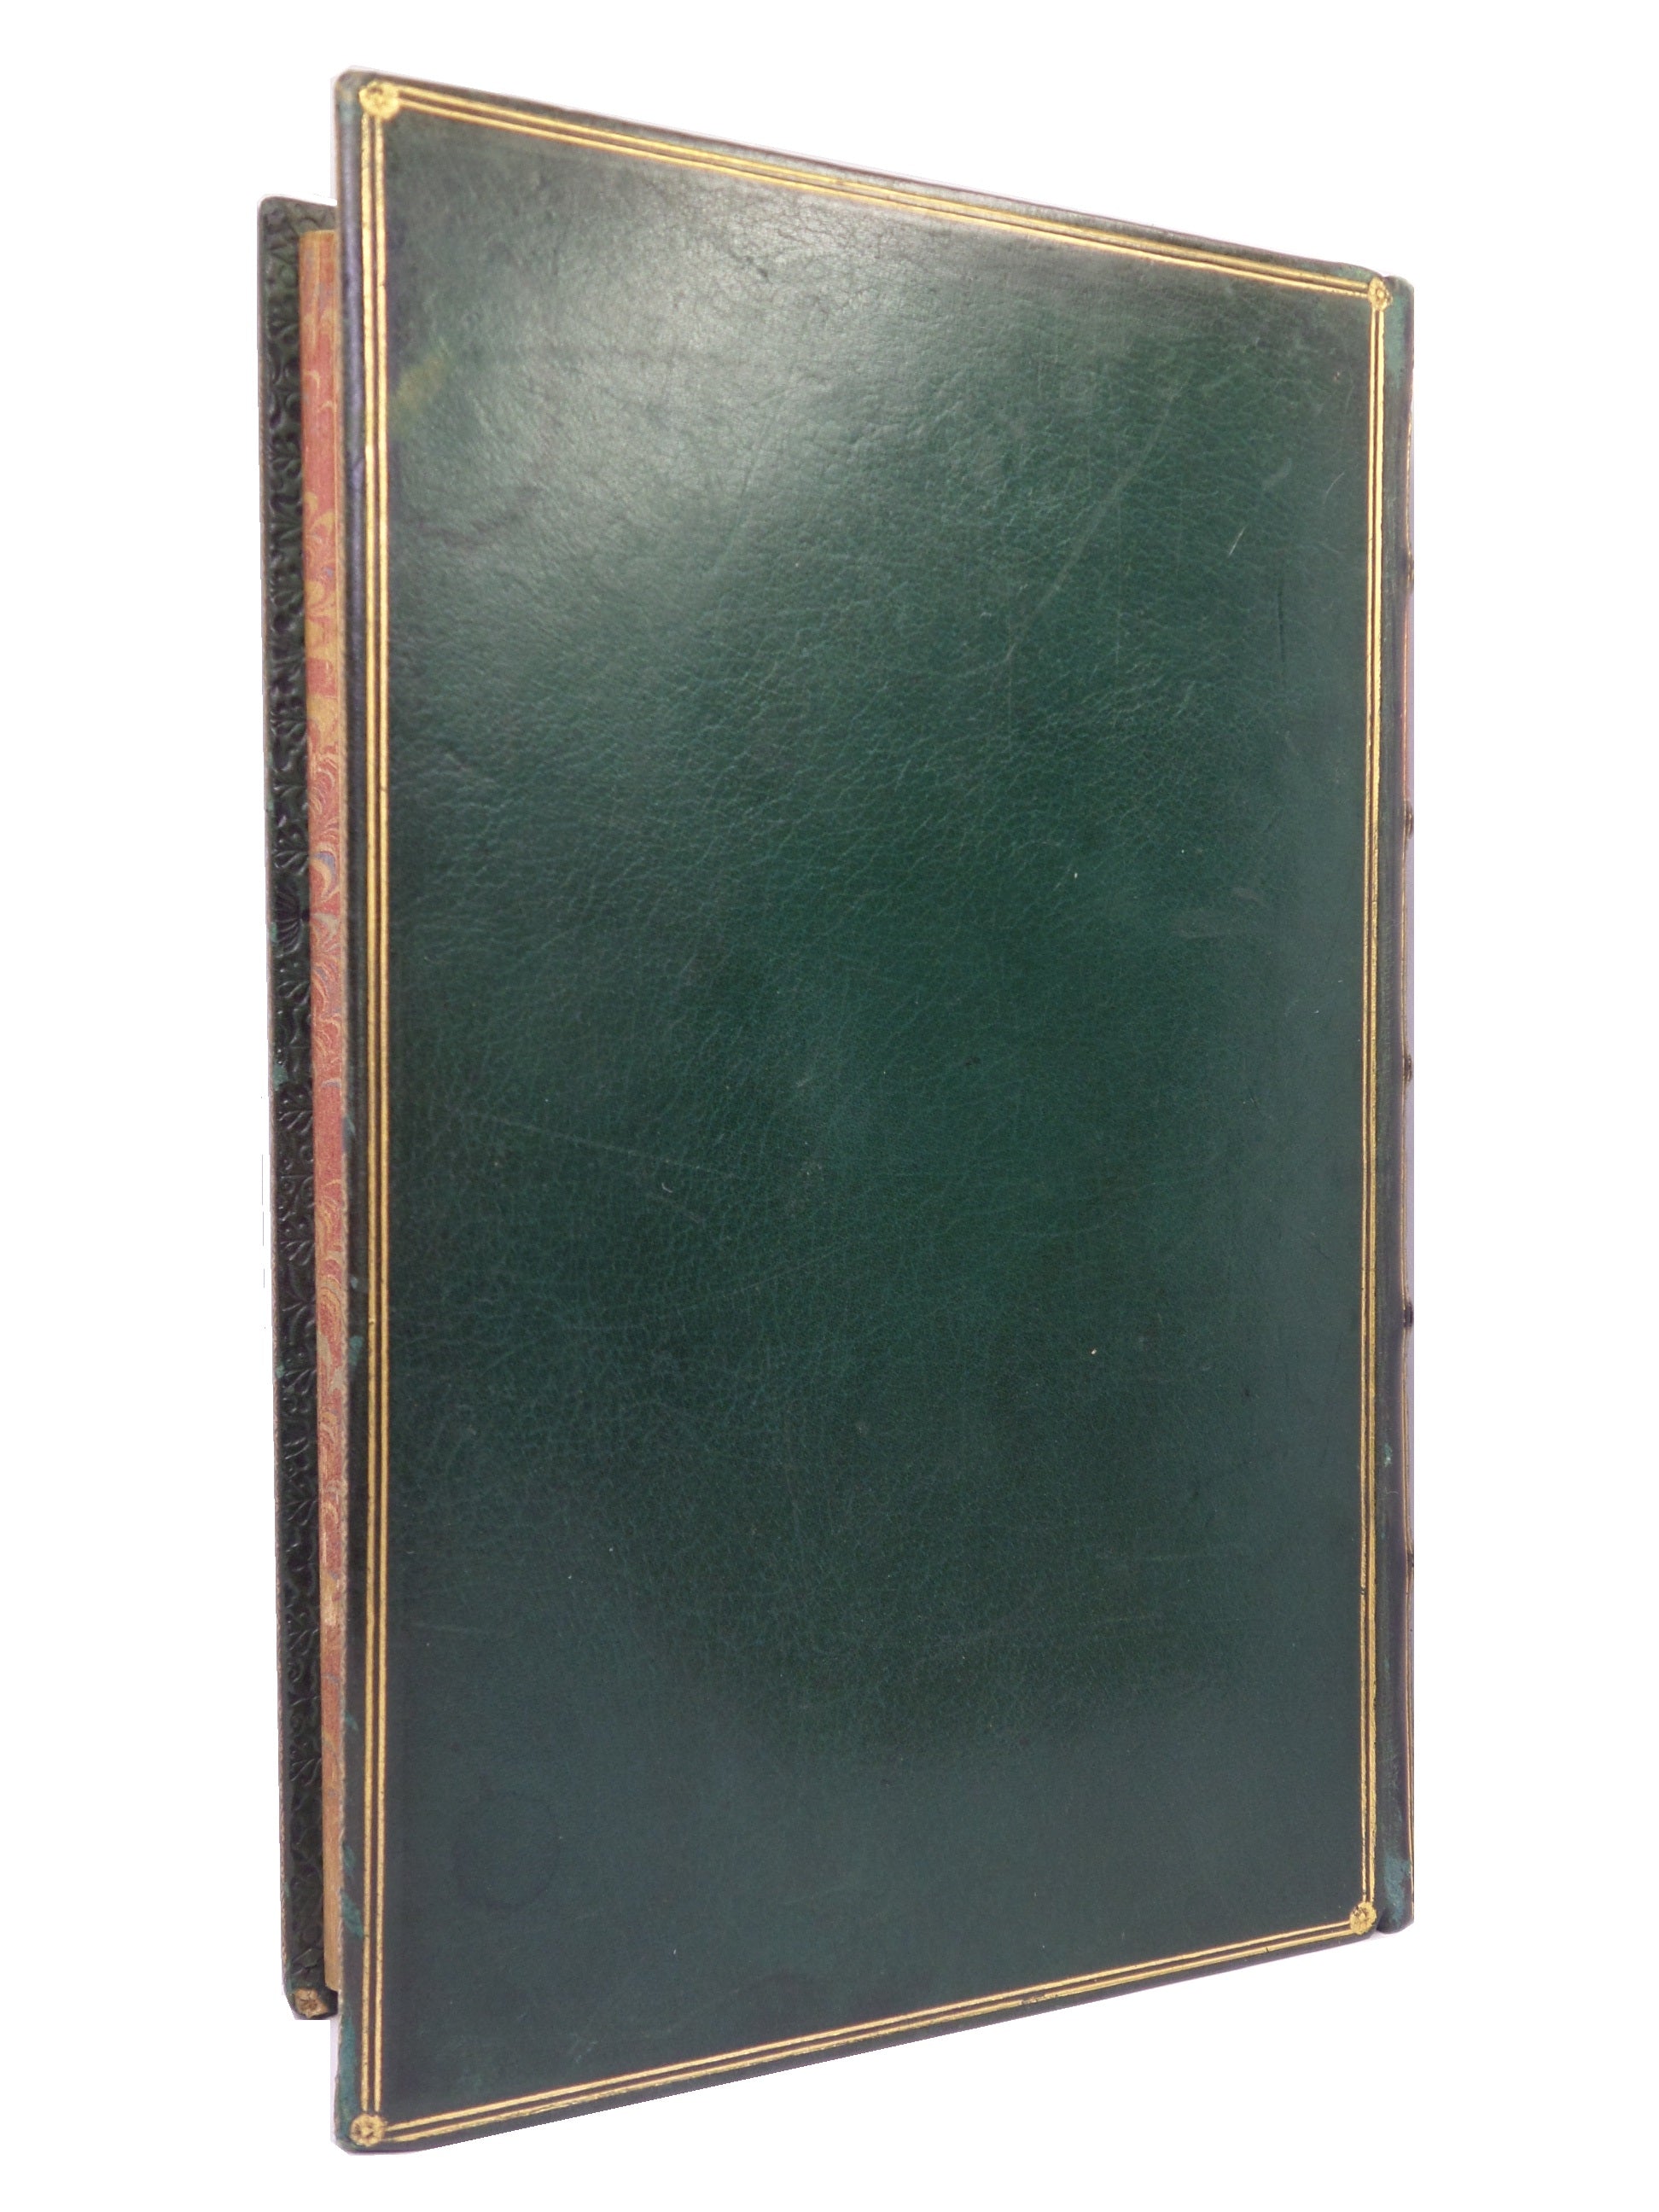 THE VISION; OR, HELL, PURGATORY, AND PARADISE 1870 DANTE ALIGHIERI LEATHER-BOUND